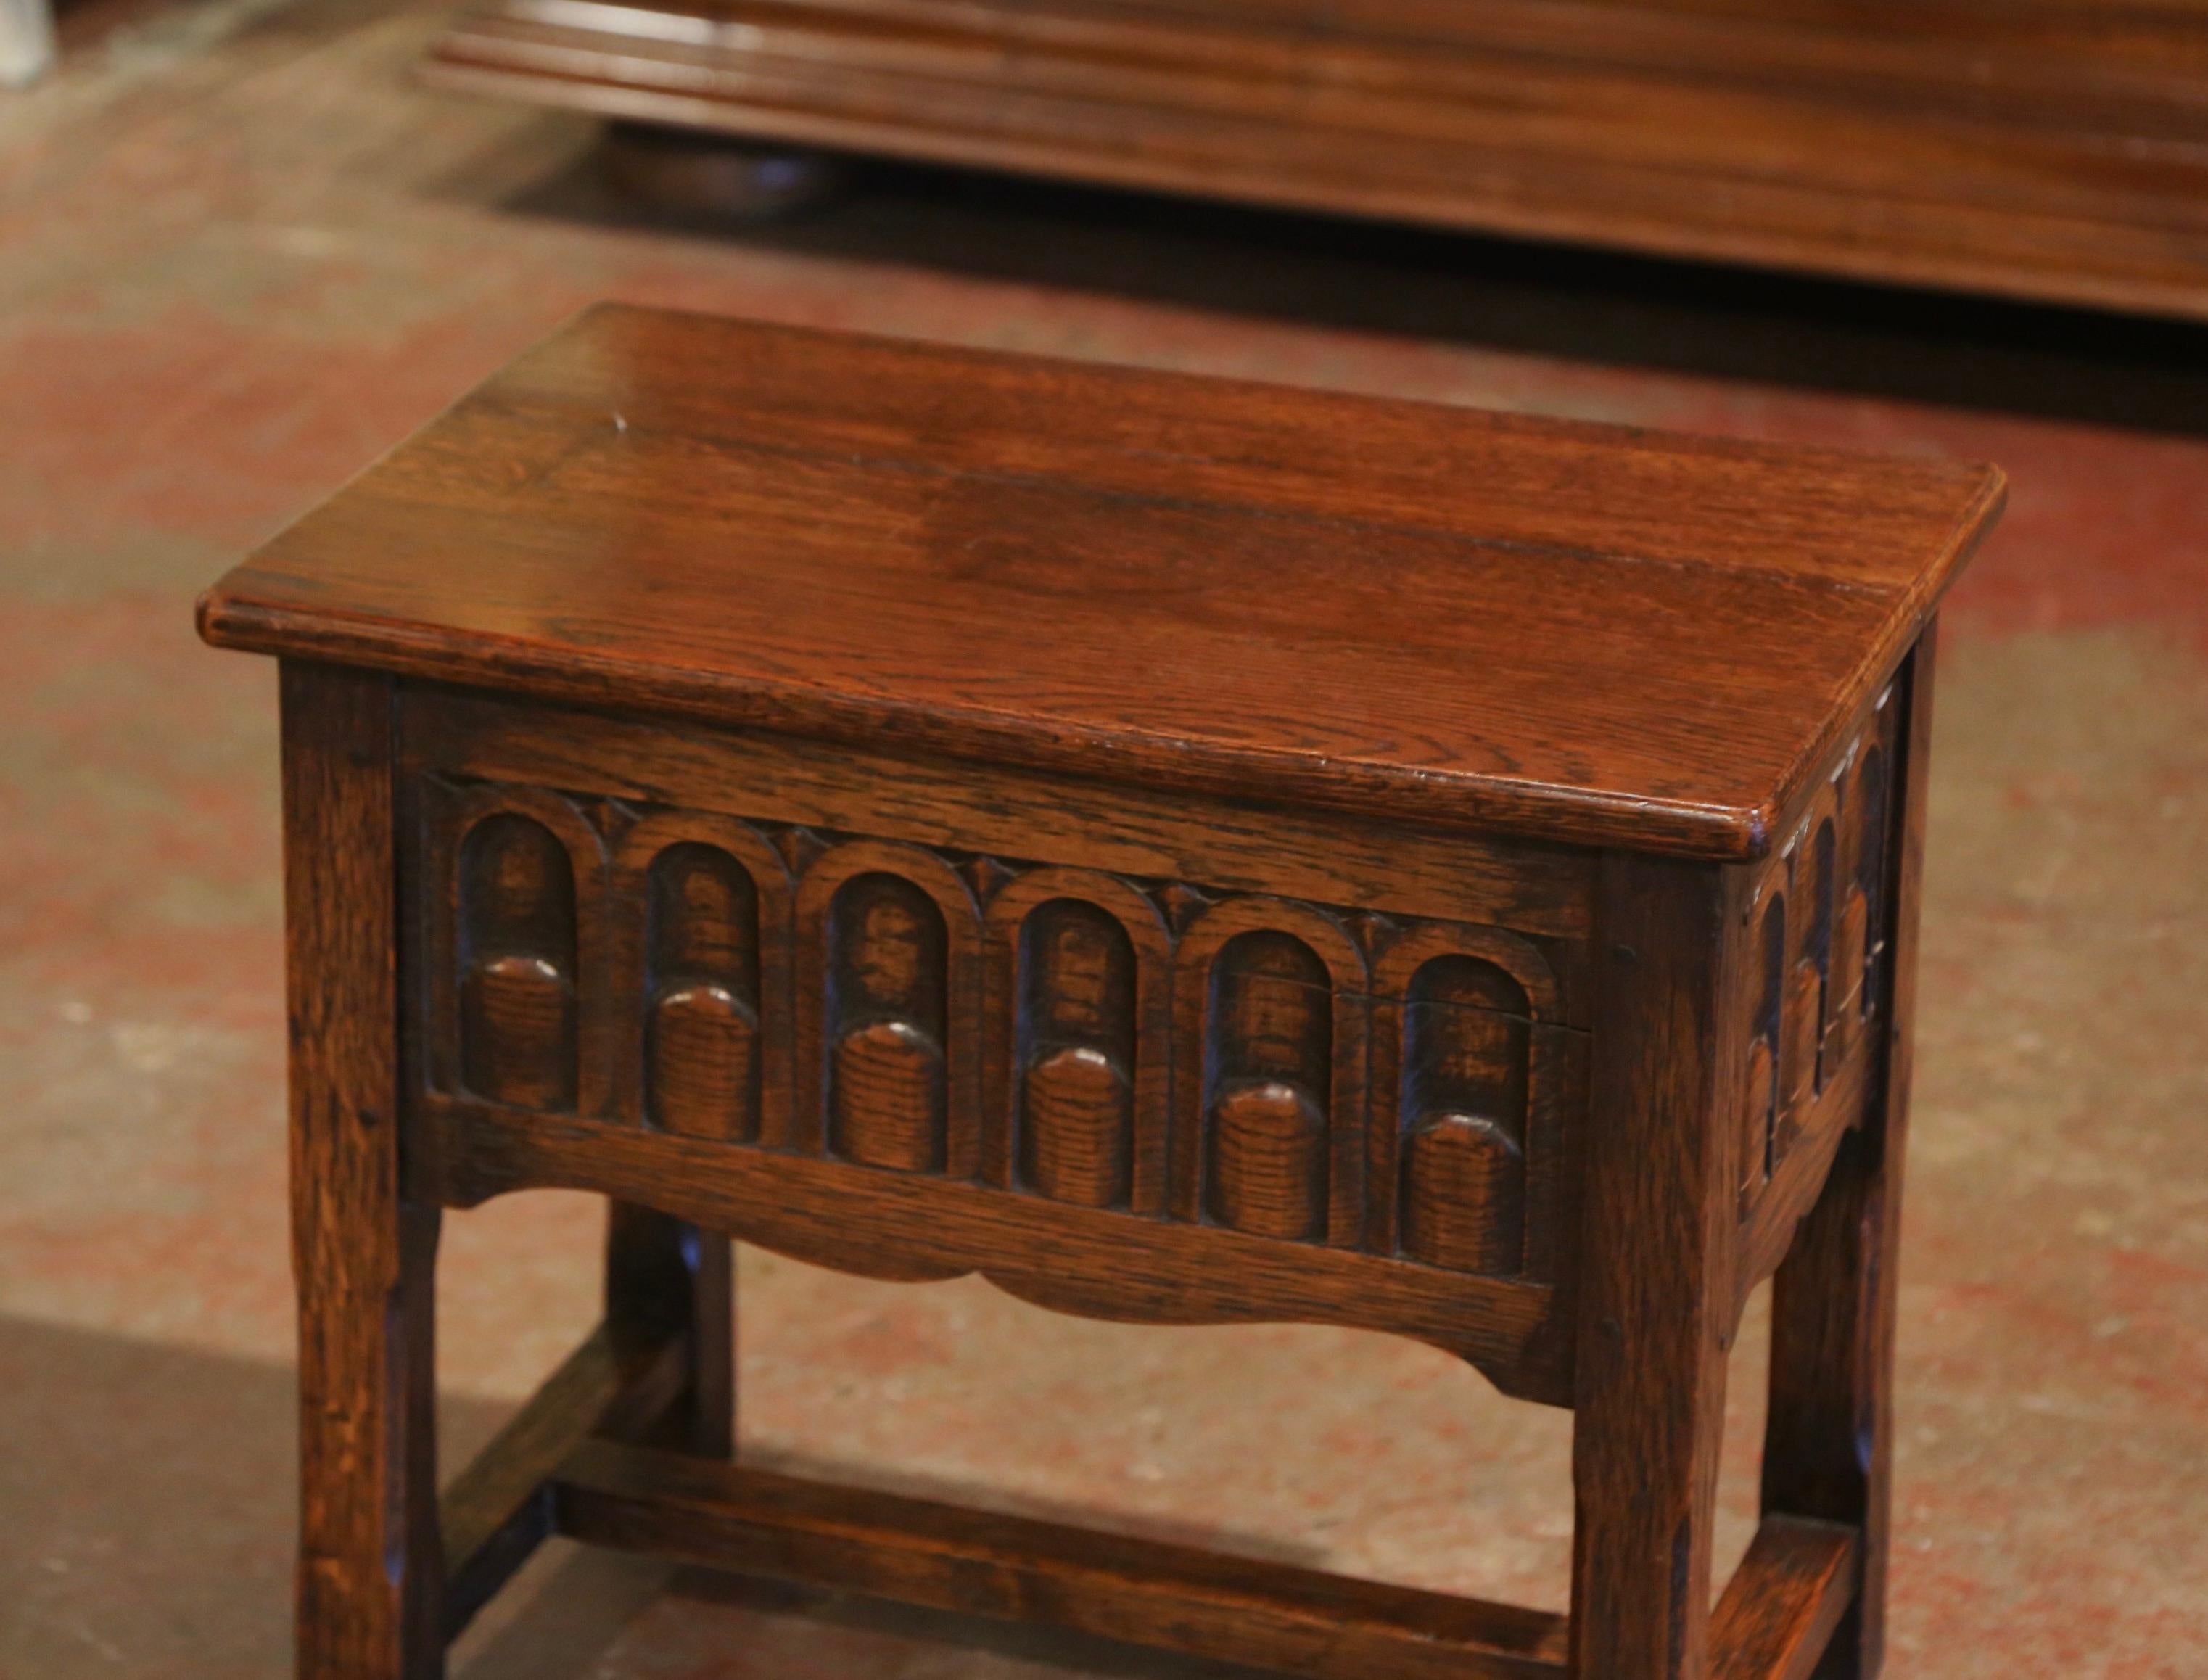 This elegant antique coffer table bench was crafted in France, circa 1920. The sturdy, Louis XIV style side table stands on square legs embellished with a bottom stretcher. All three sides feature hand carved panels with geometric motifs over a